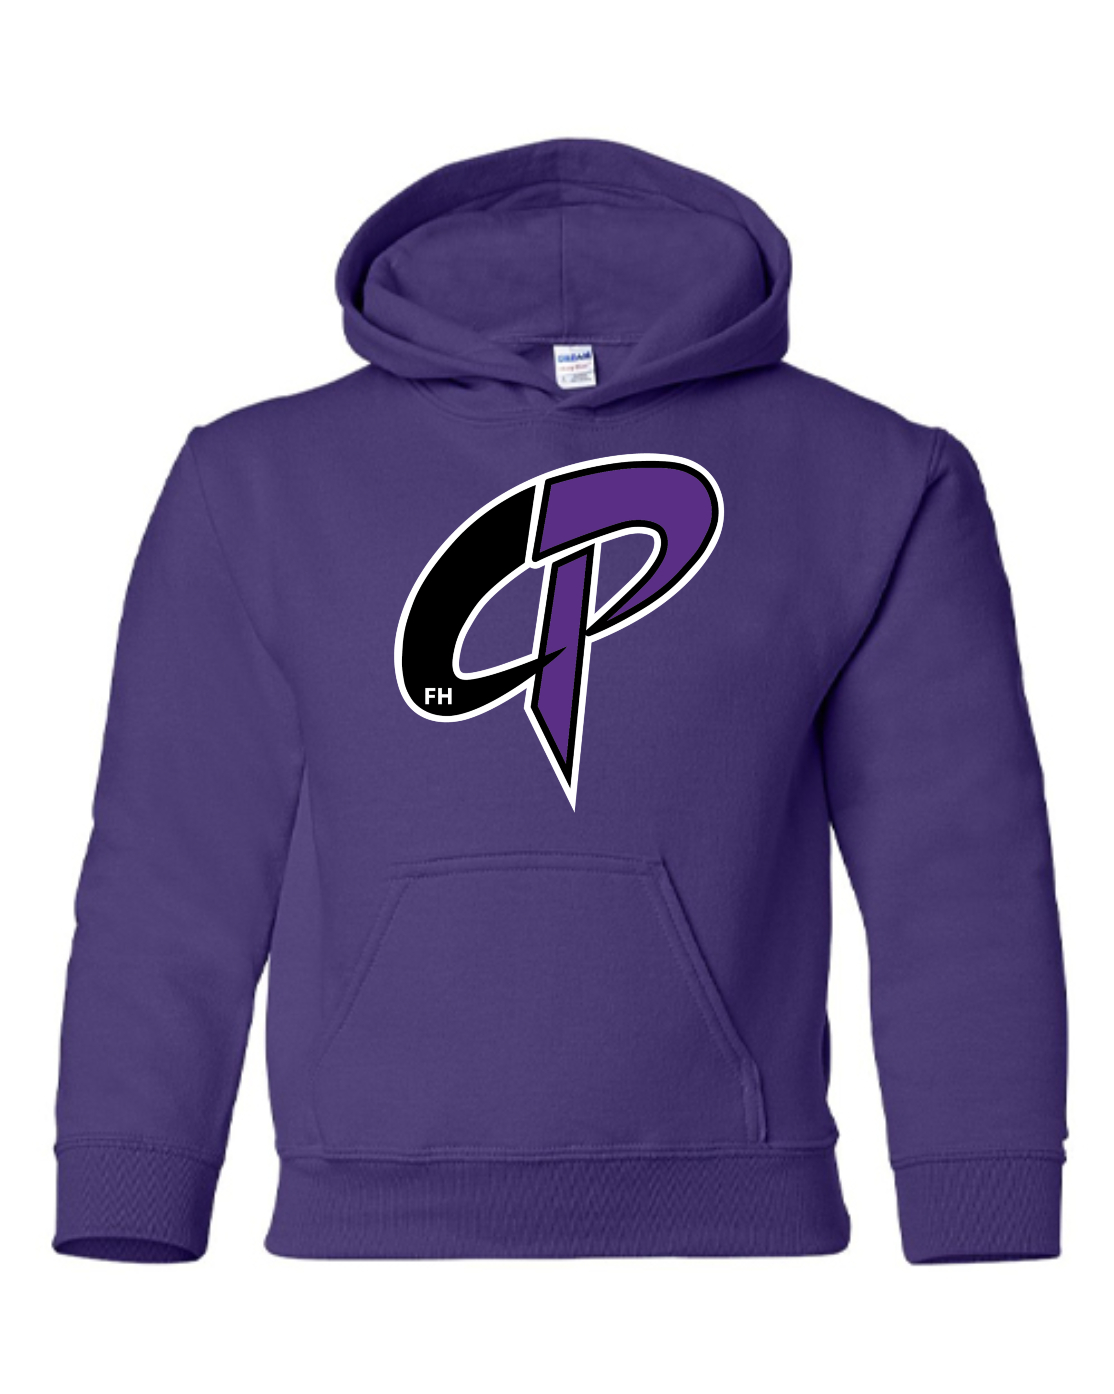 CPFH Standard Youth Hoodie